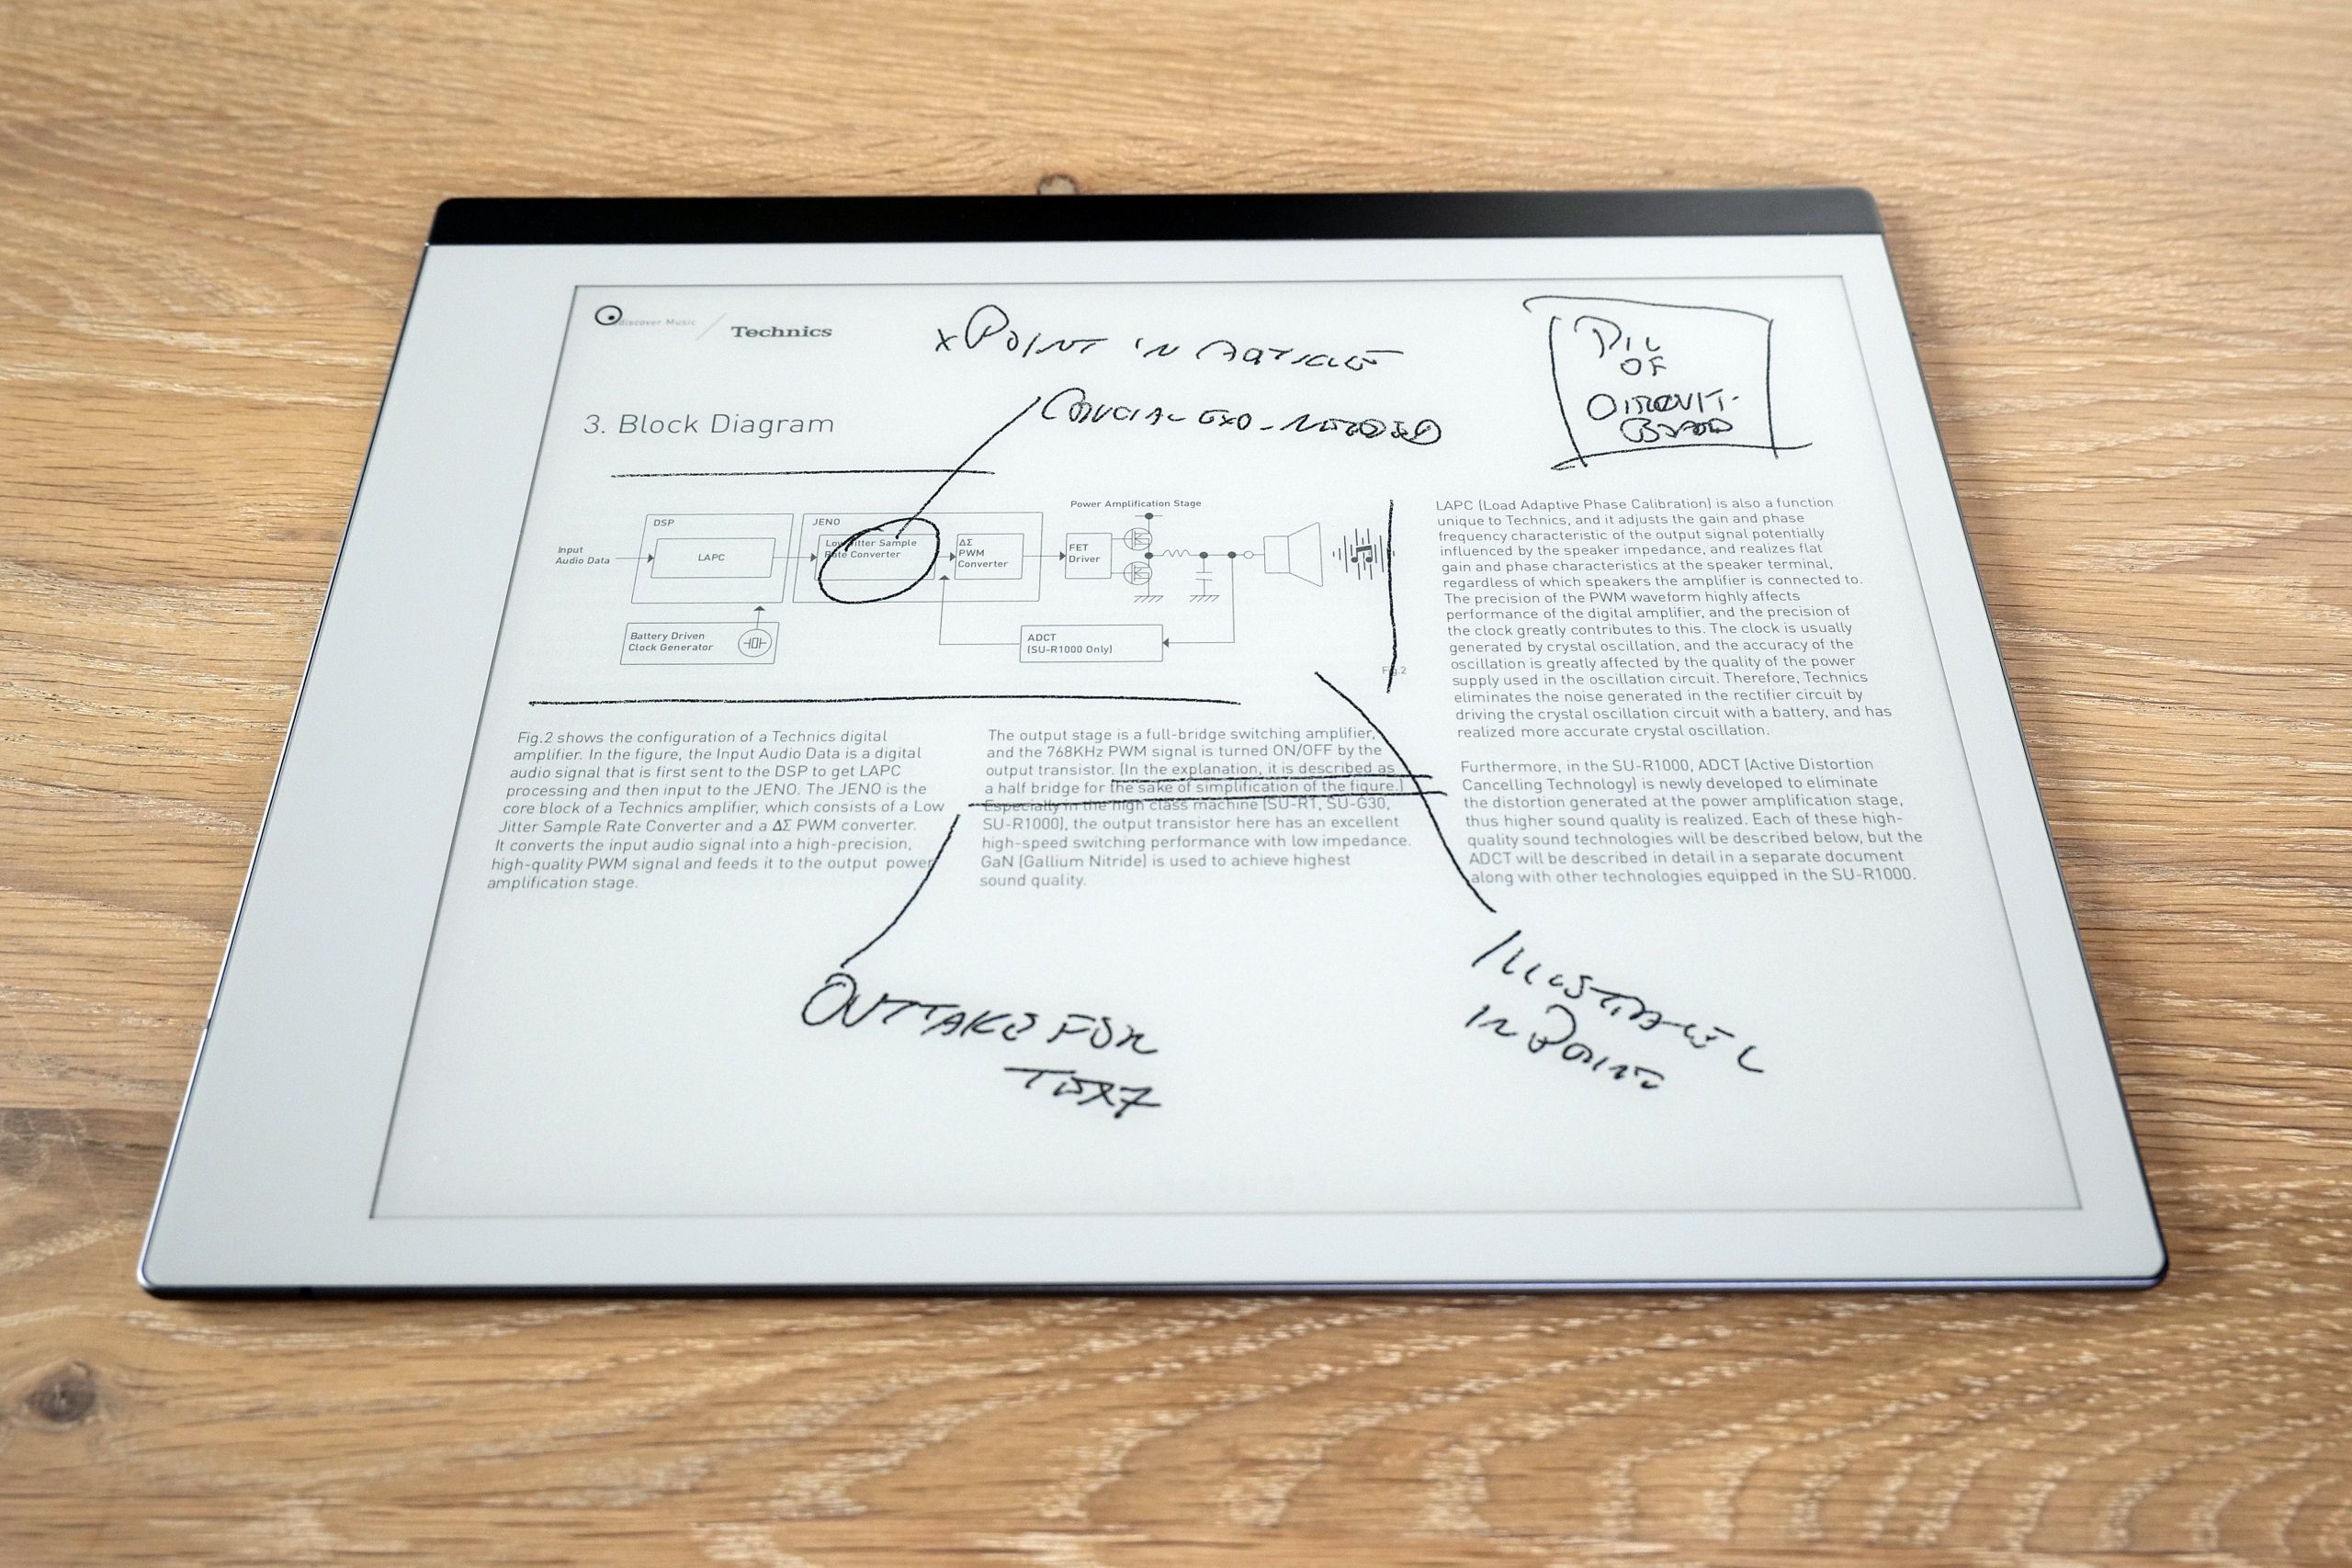 Crowdfunded reMarkable e-paper tablet ships on August 29